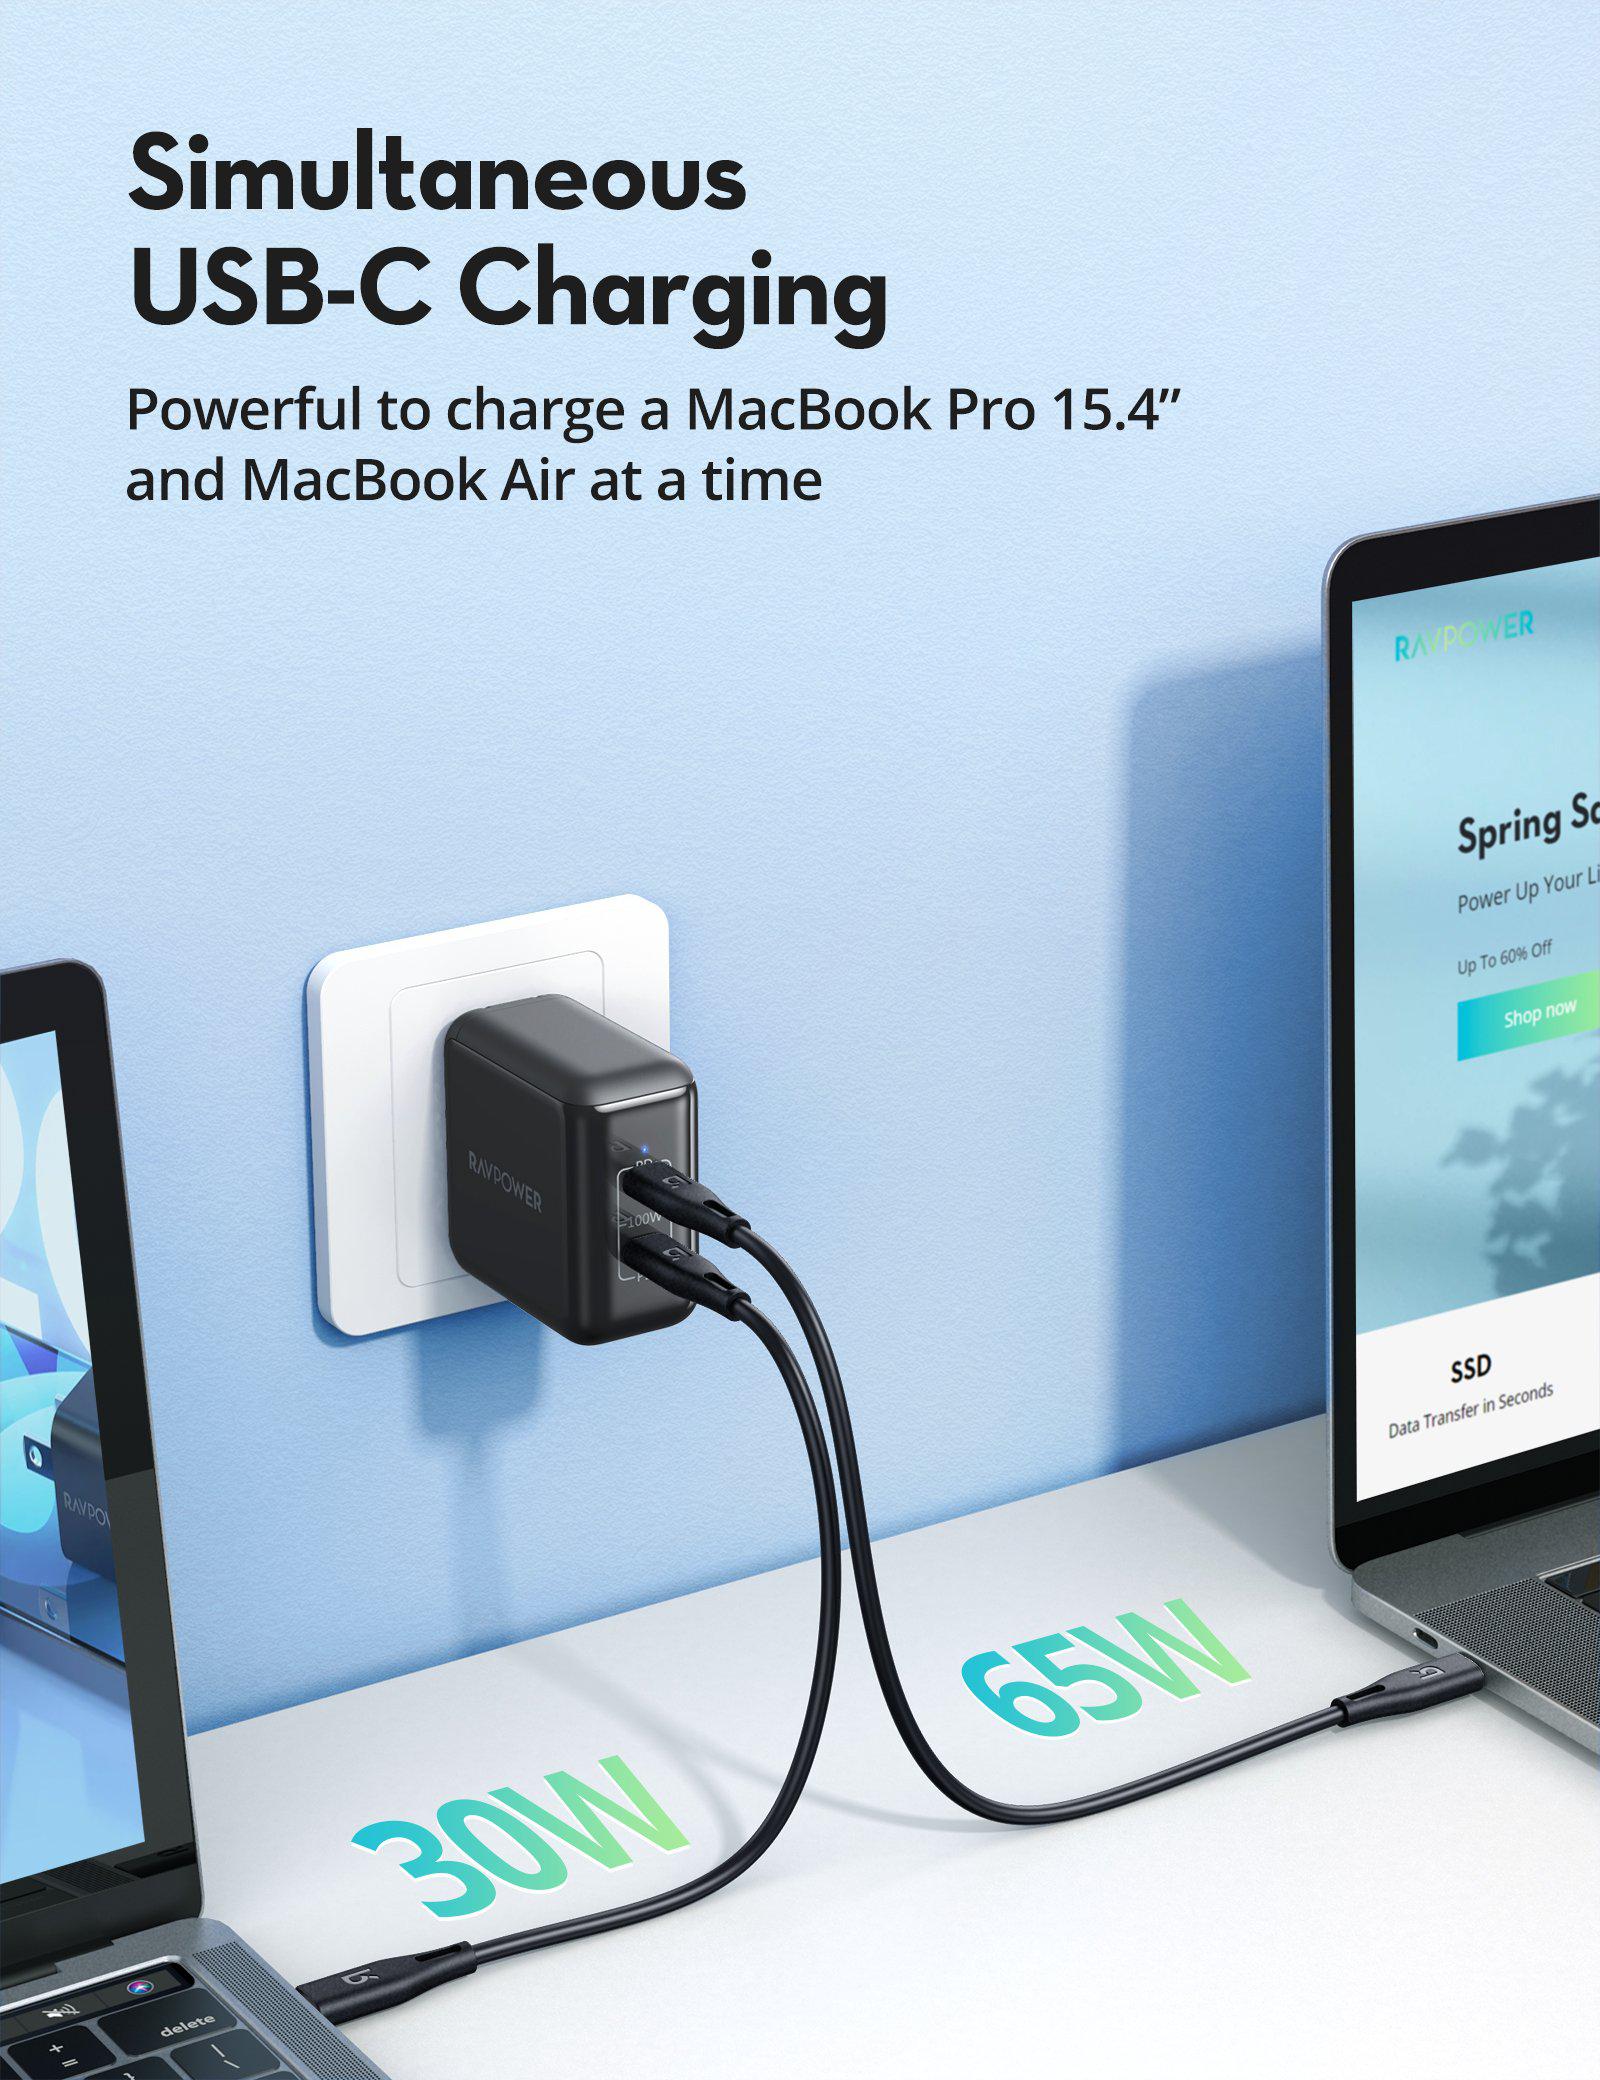 100W 2 USB C Ports PD Wall Charging Adapter with E-Mark Cable-RAVPower